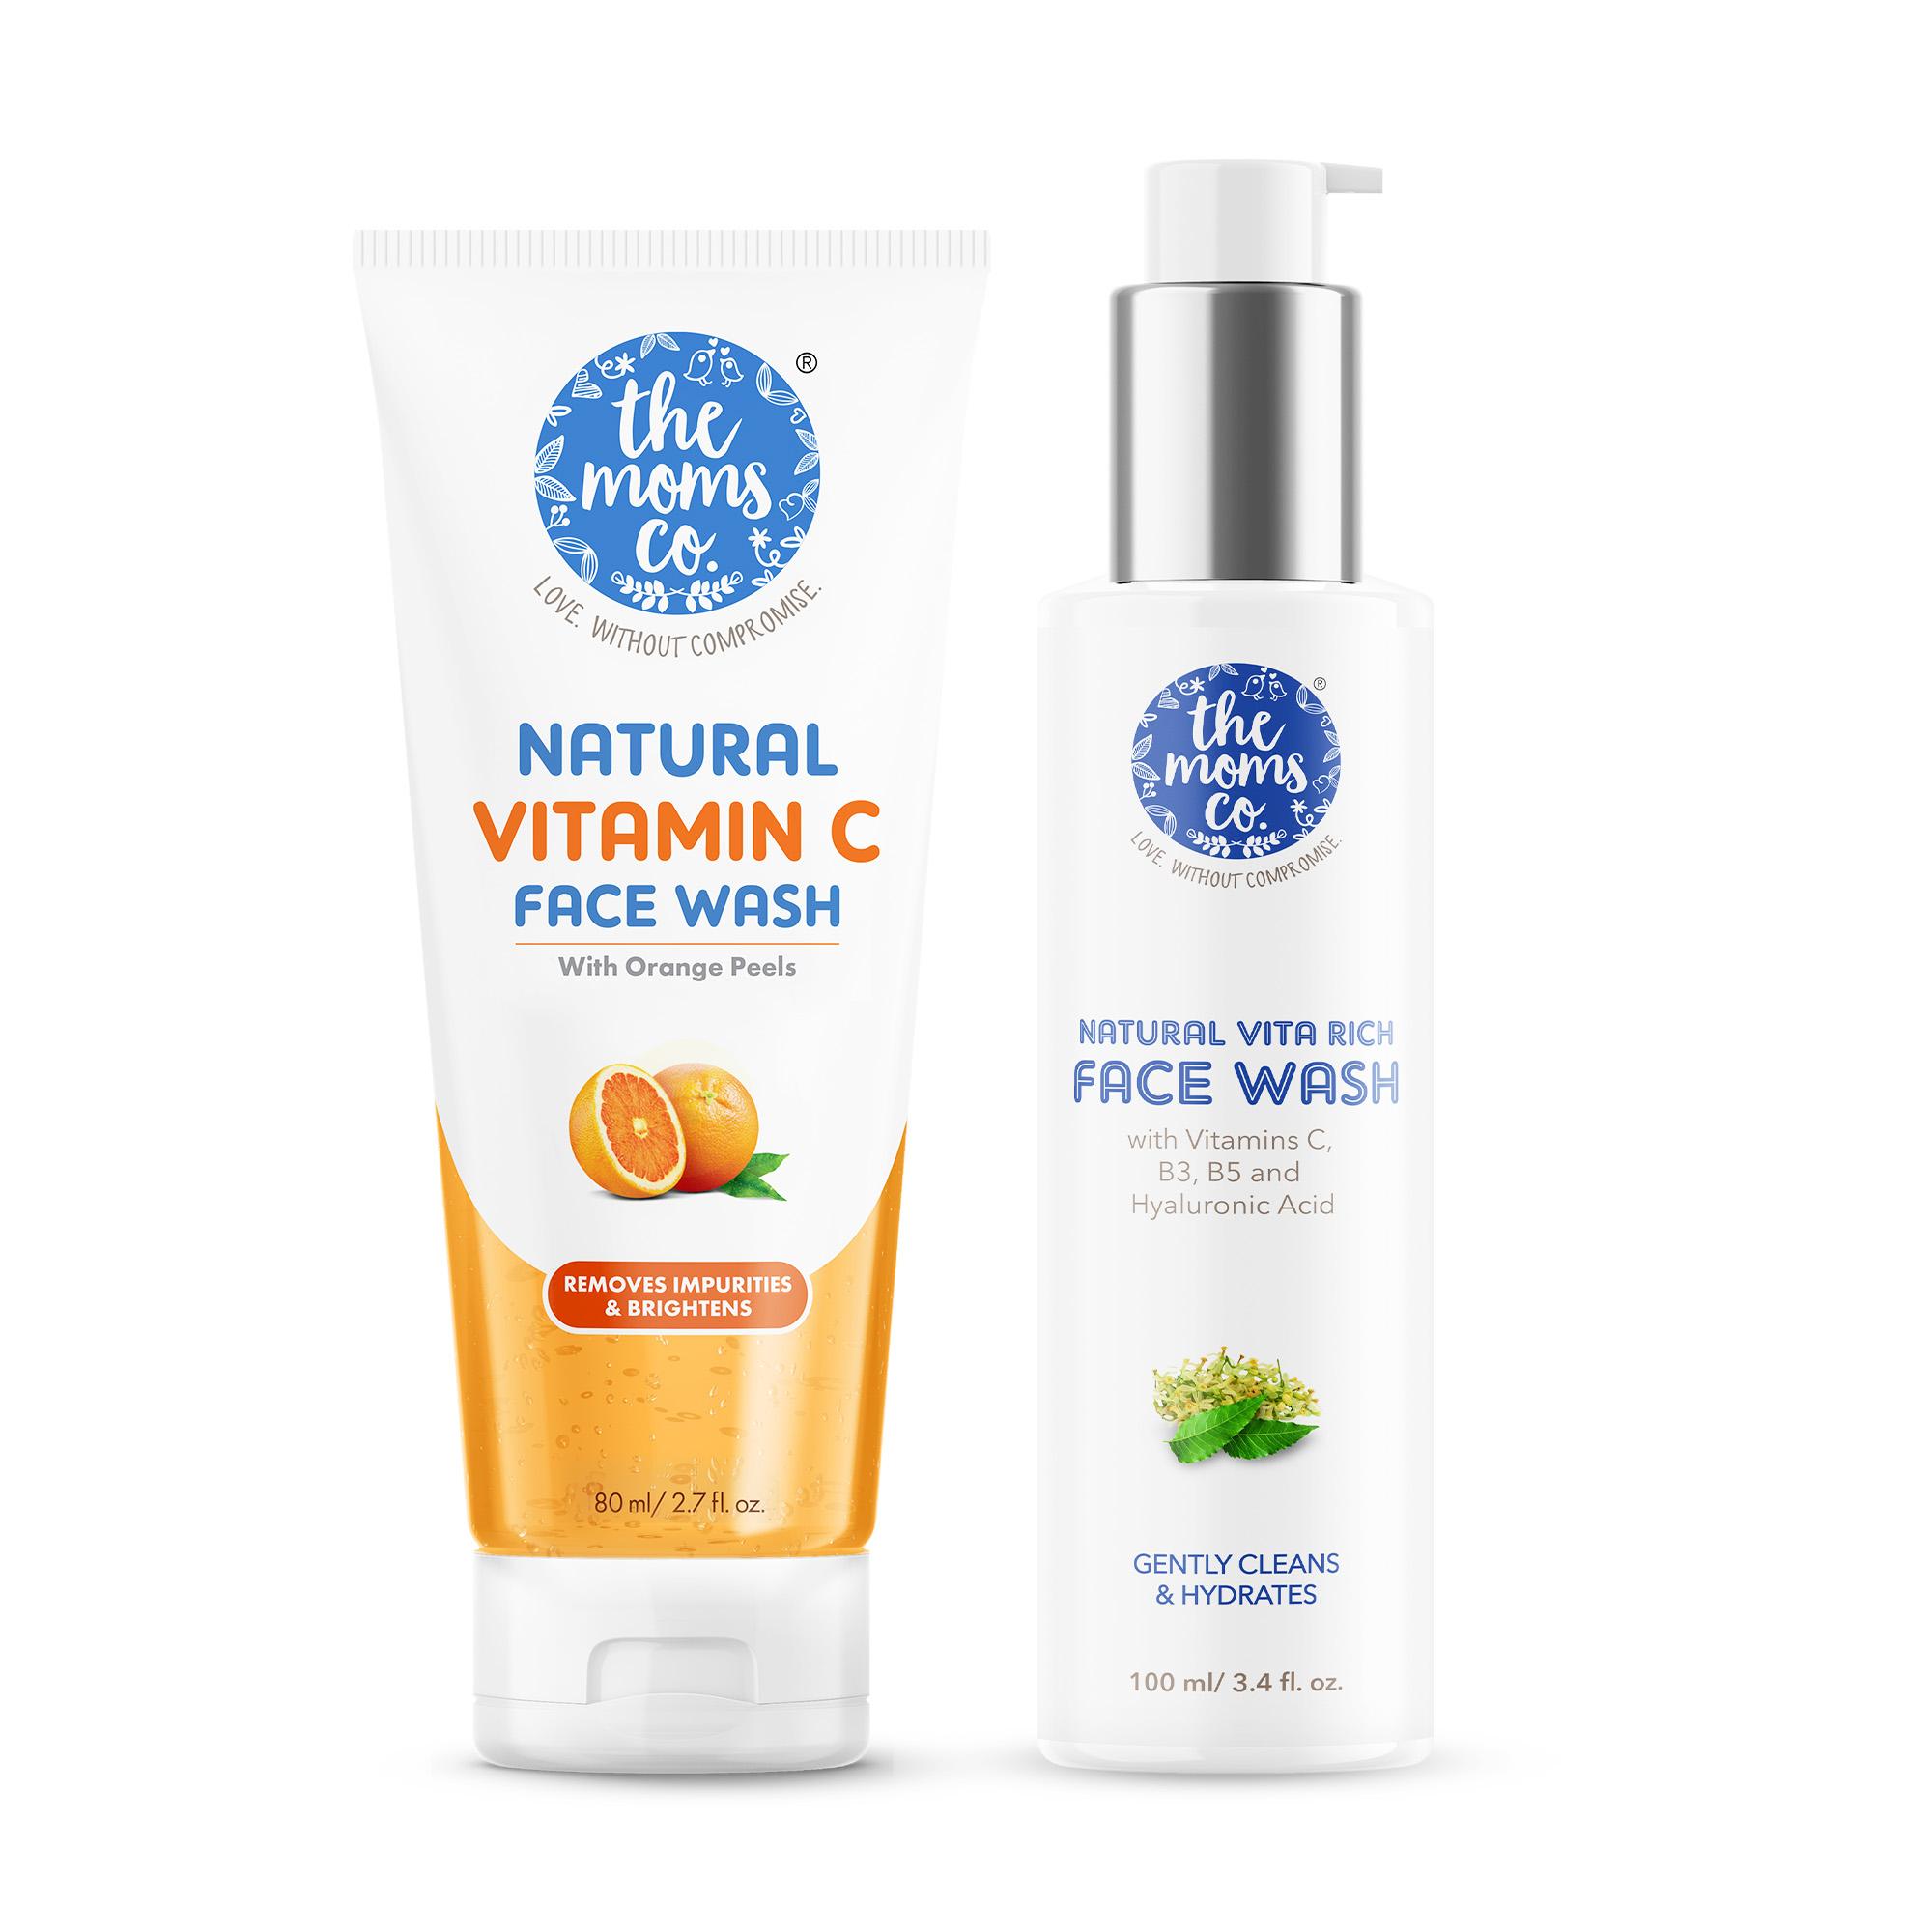 The Mom's Co. | The Mom's Co. Natural Vitamin C Face Wash & Natural Vita Rich Face Wash Combo